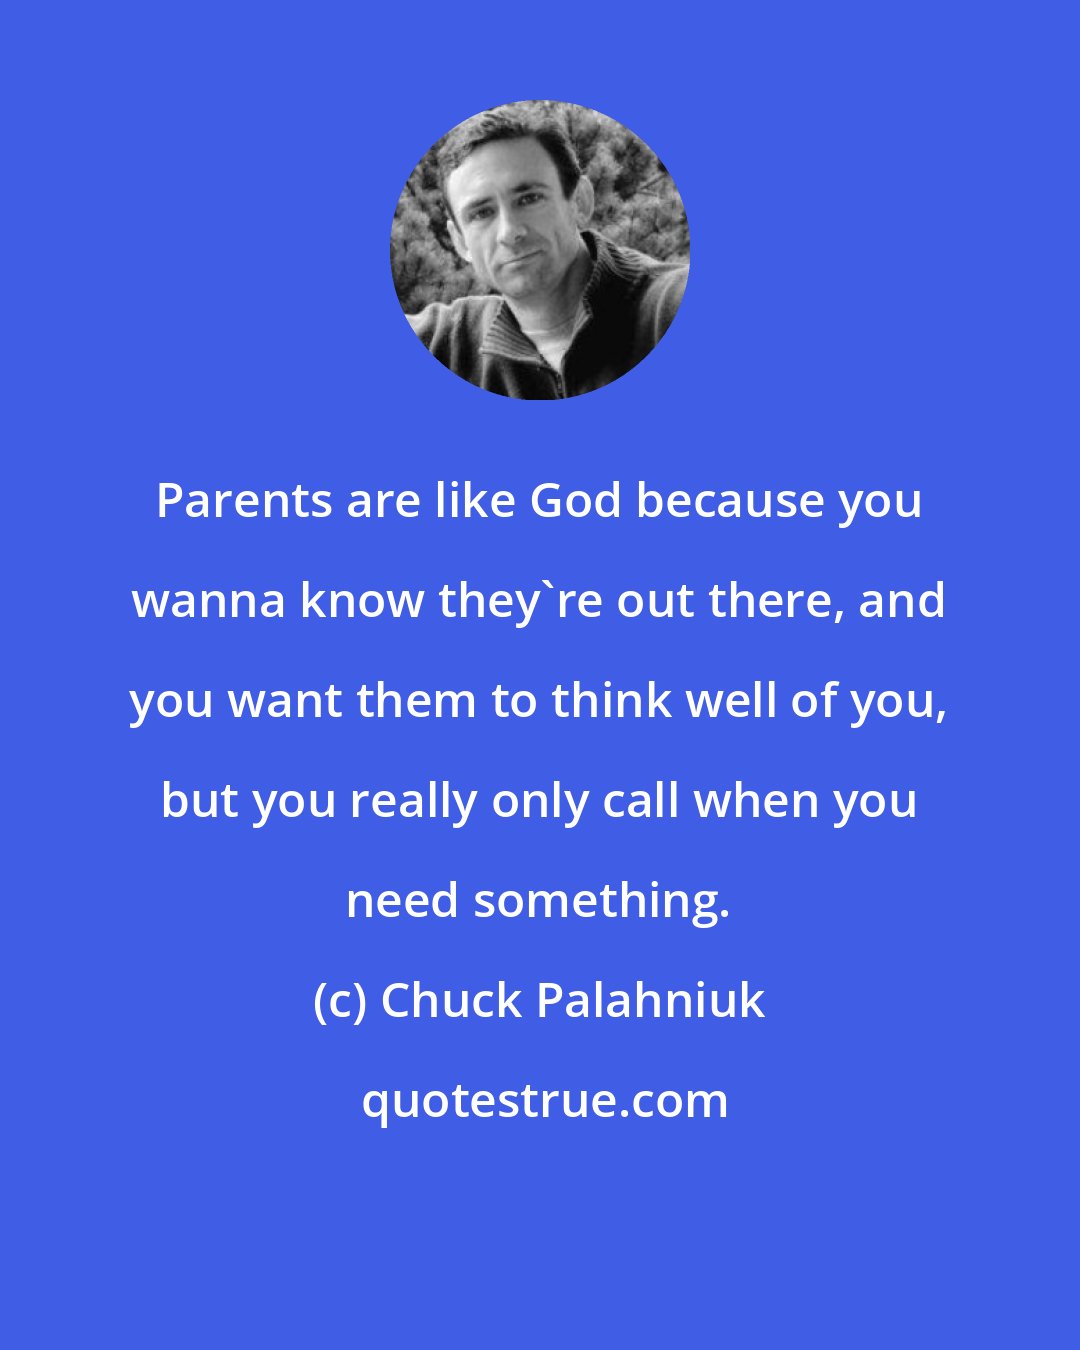 Chuck Palahniuk: Parents are like God because you wanna know they're out there, and you want them to think well of you, but you really only call when you need something.